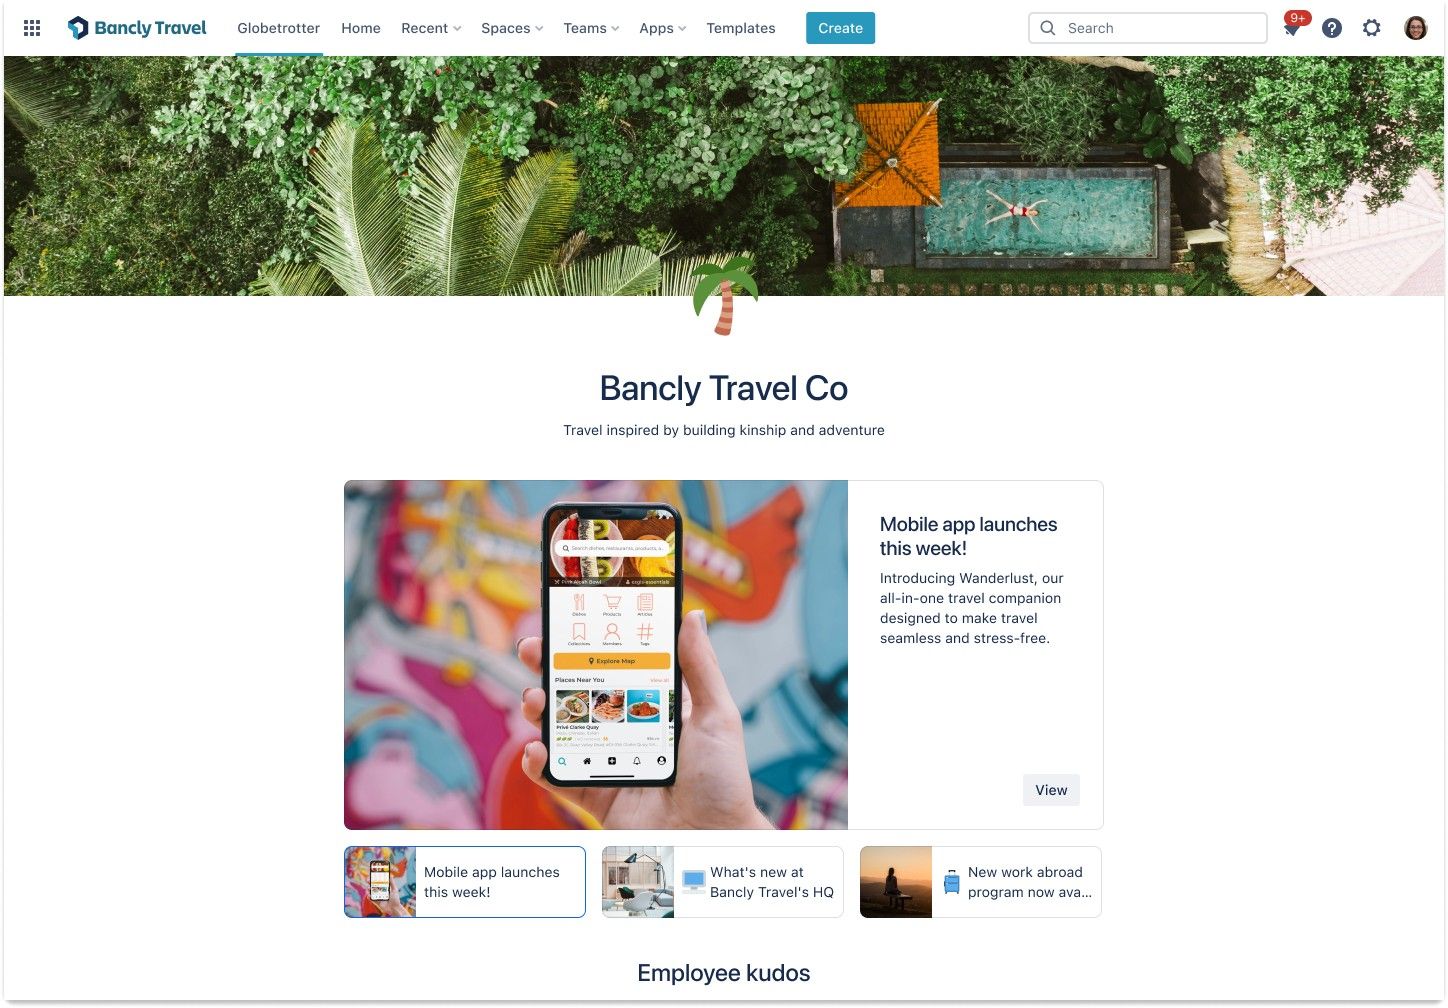 A view of a company hub landing page for imaginary company Bancly Travel Co